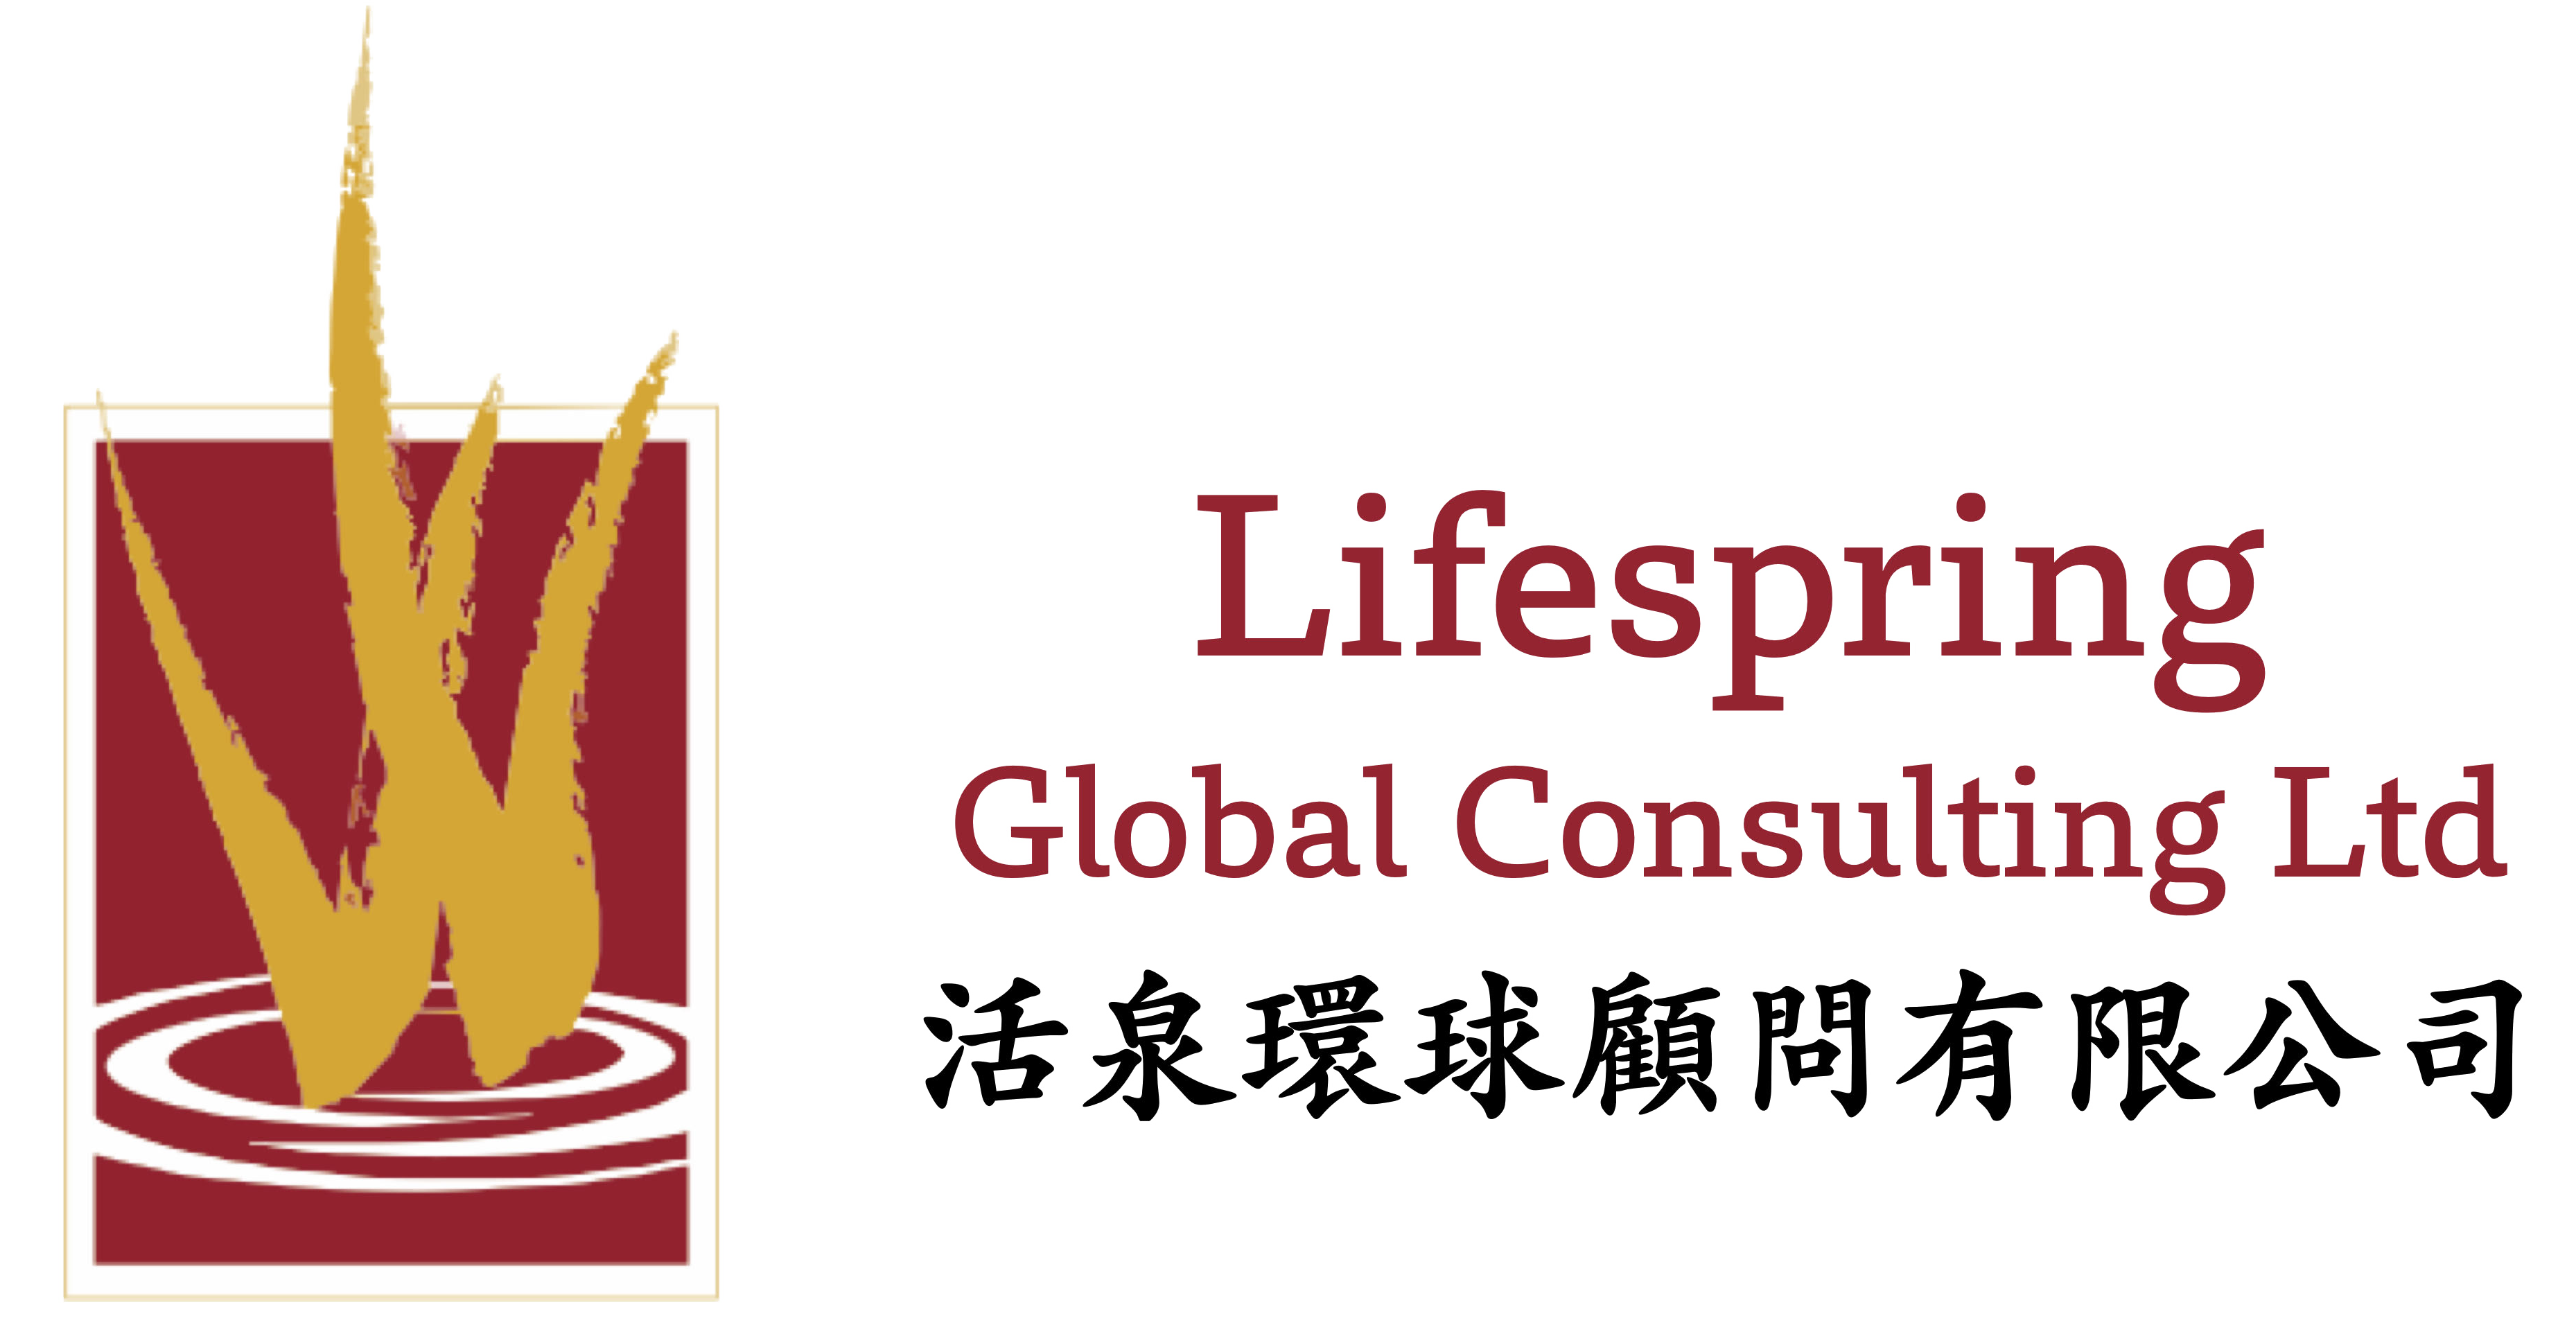 Wellspring Global Consulting Limited